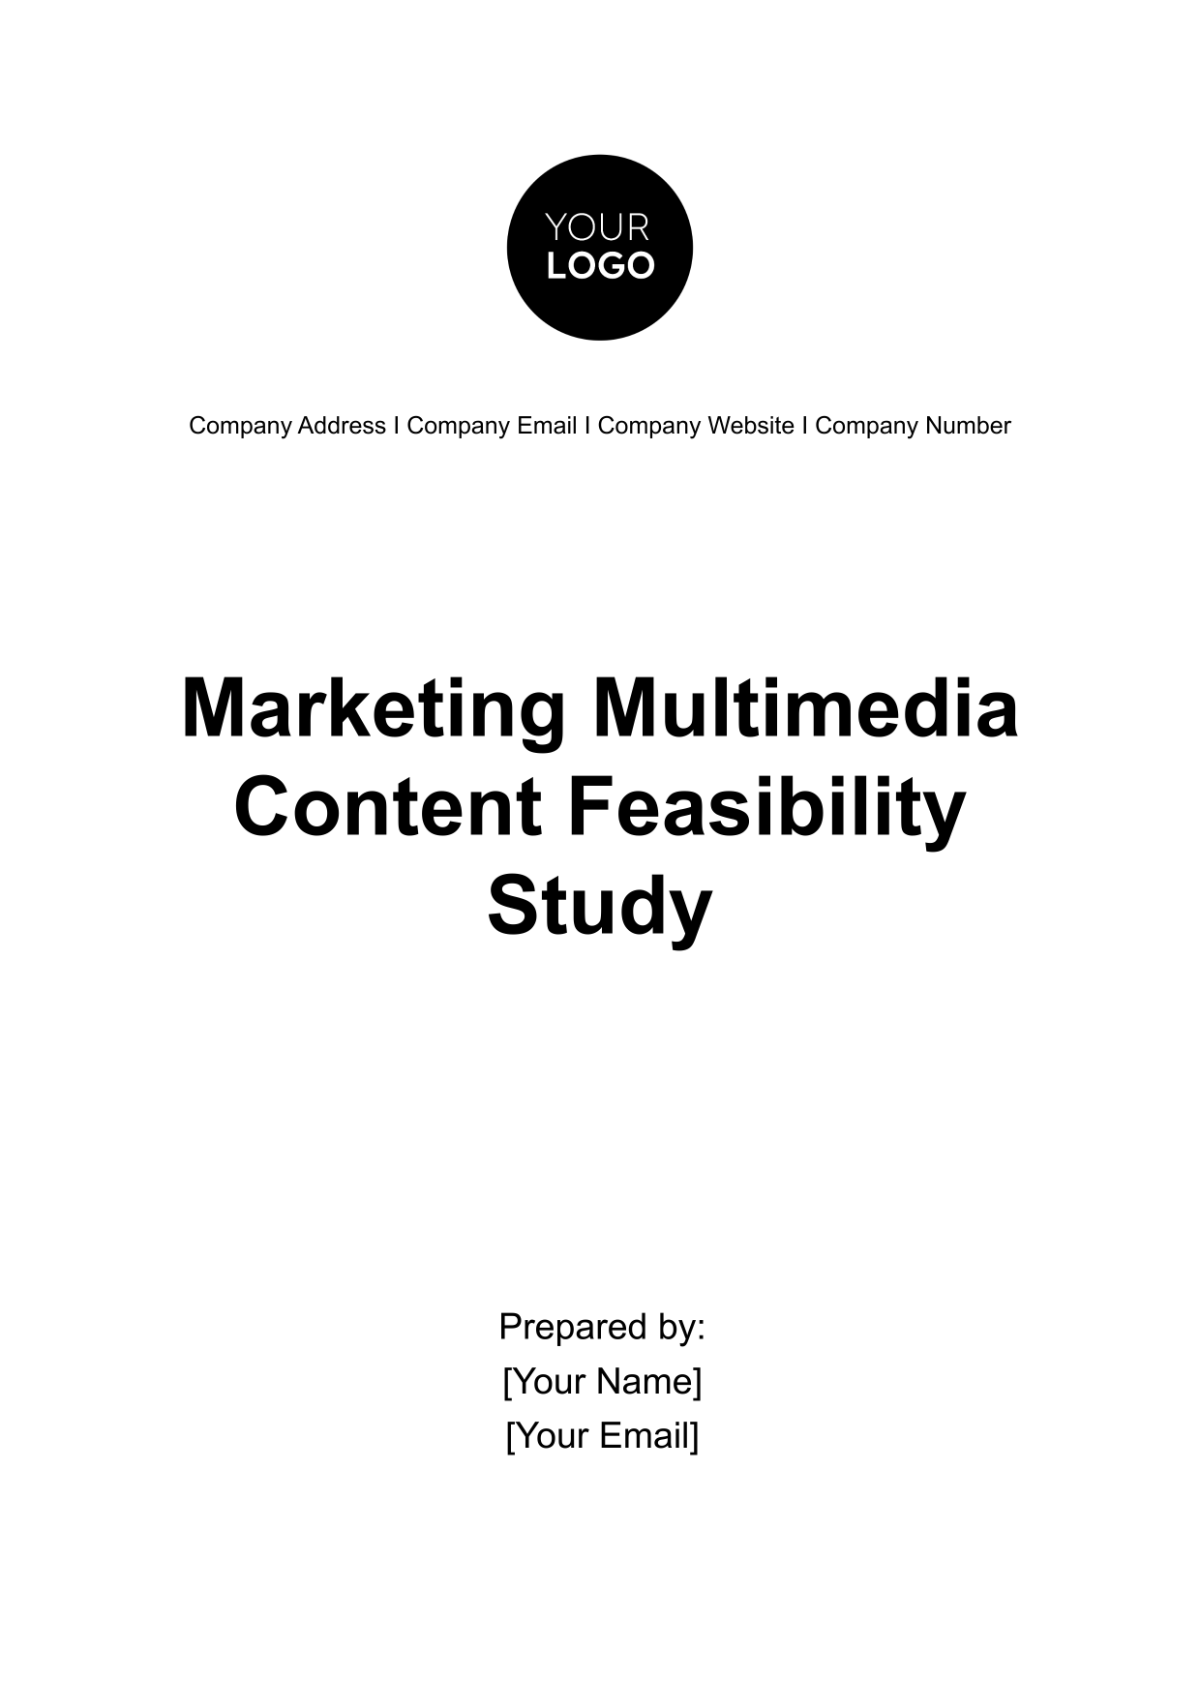 Free Marketing Multimedia Content Feasibility Study Template